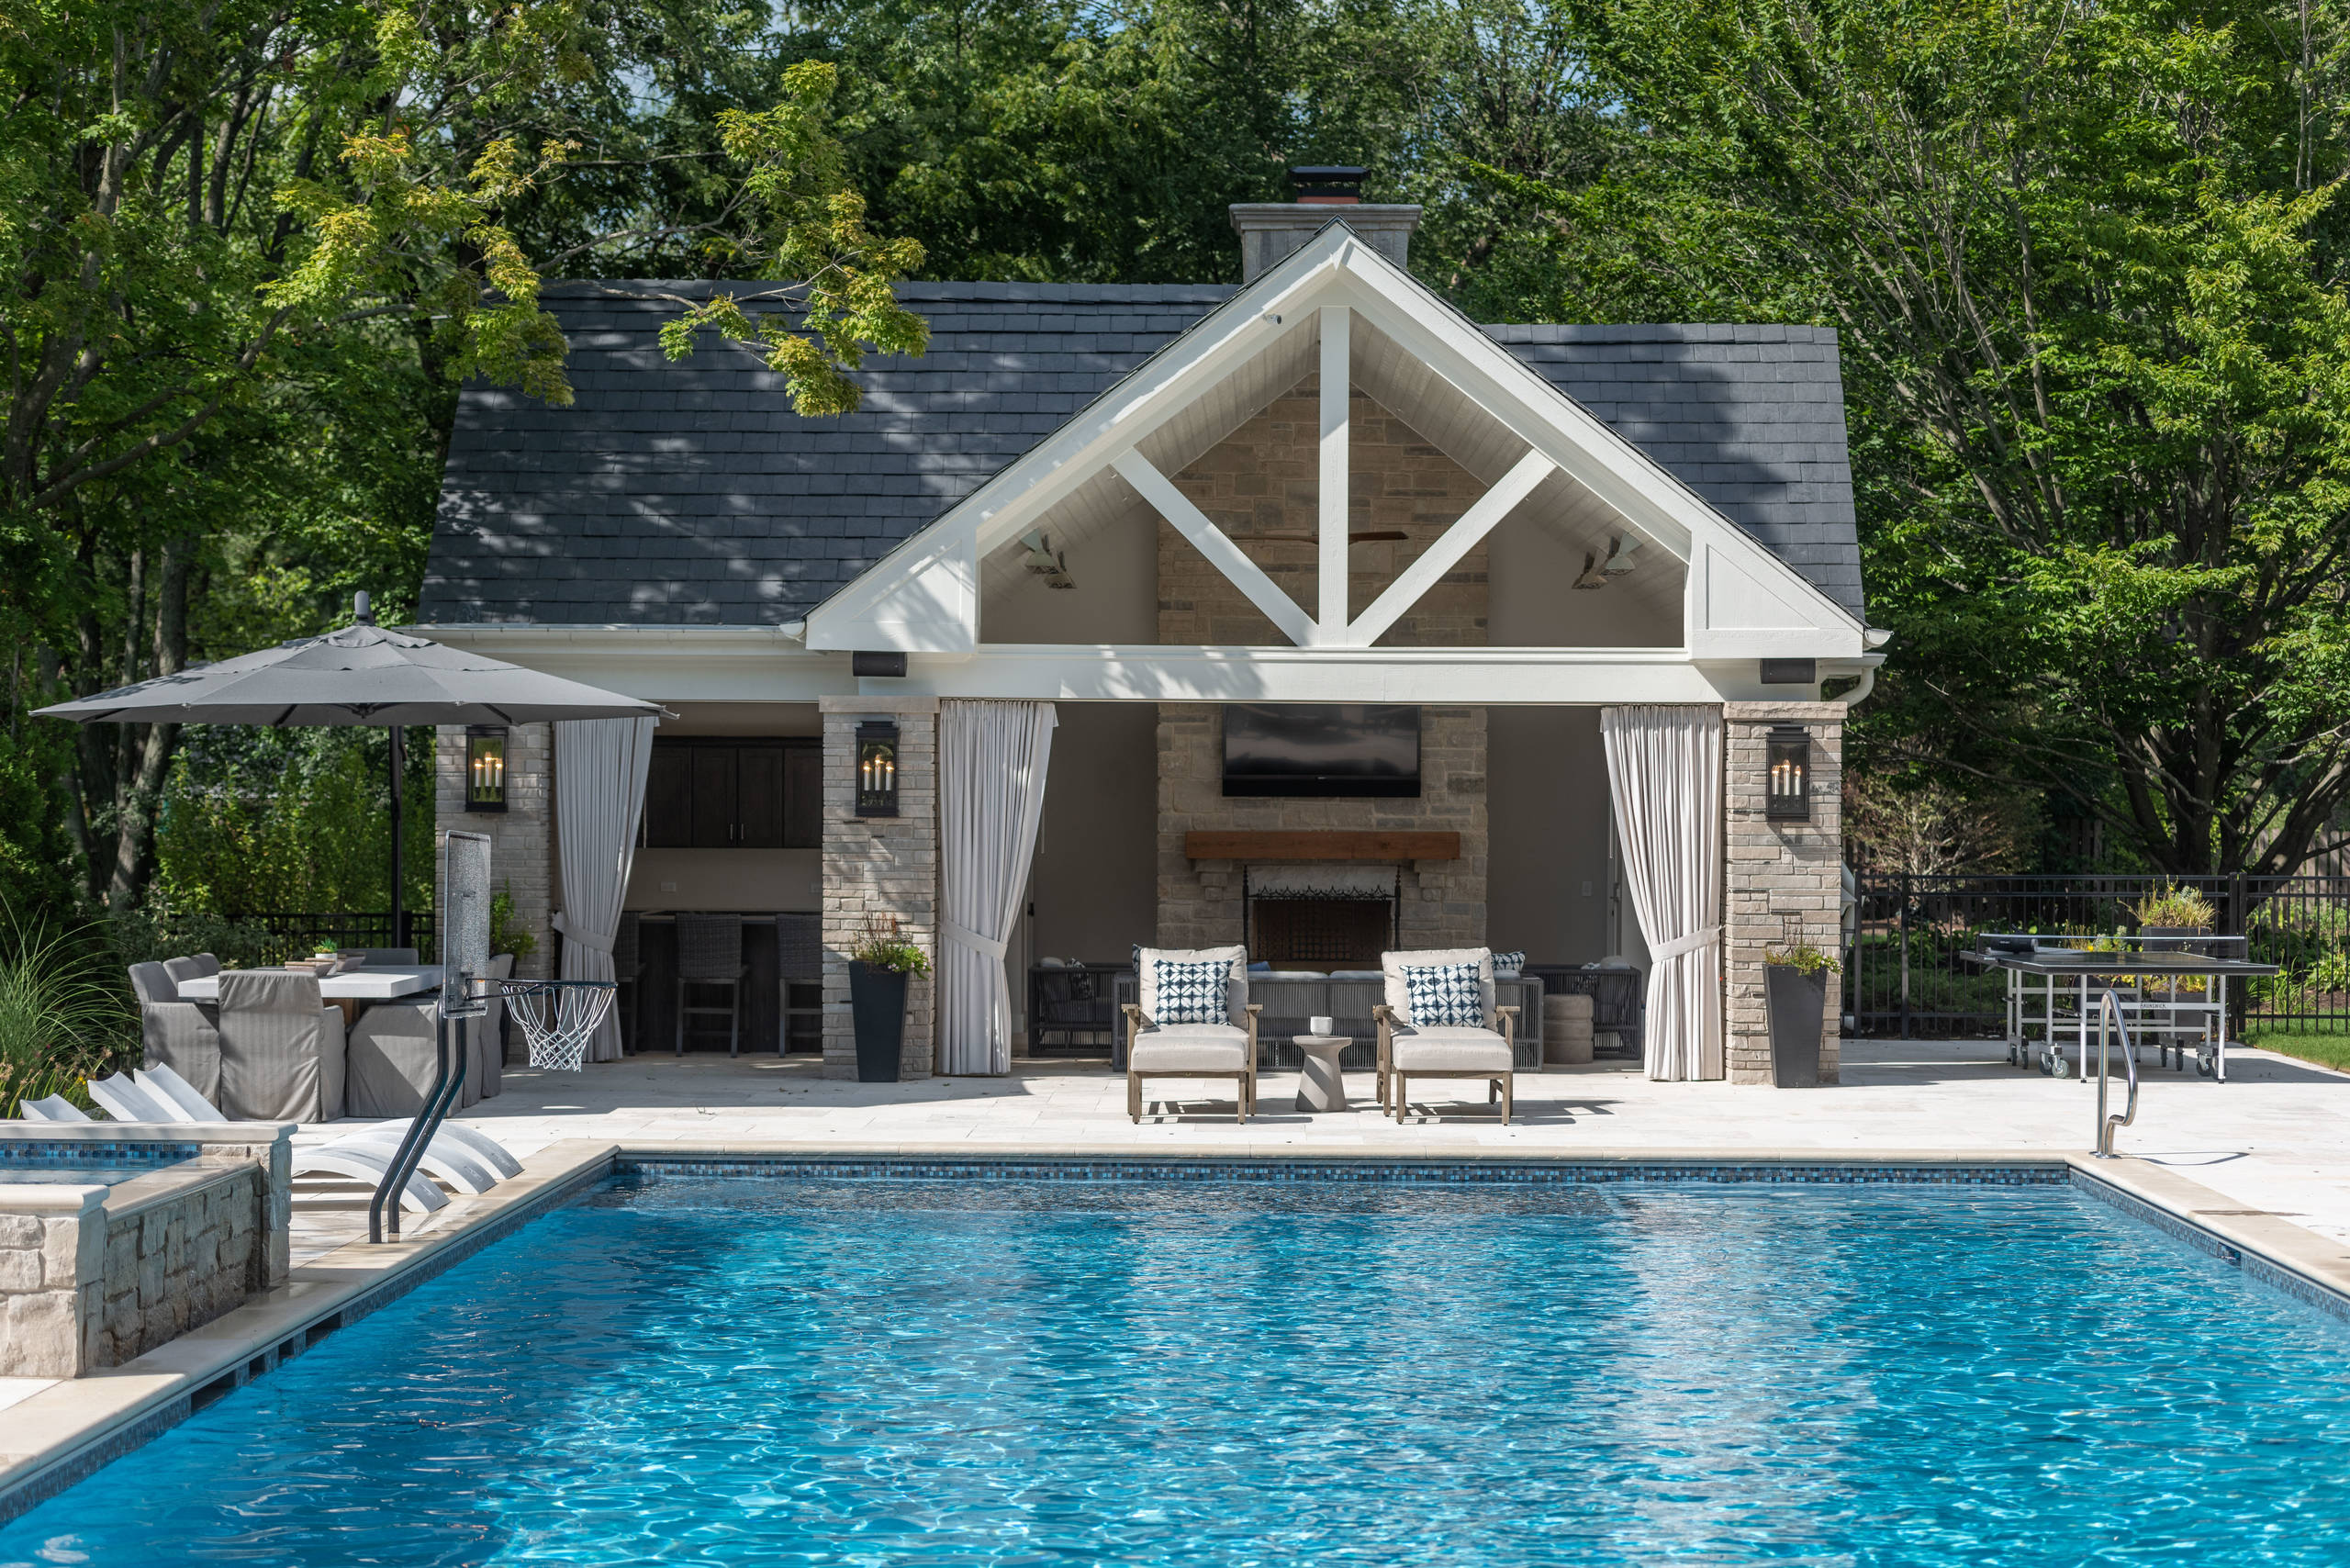 999 Beautiful Pool House Pictures Ideas October 2020 Houzz,Brown Neutral Living Room Wall Colors